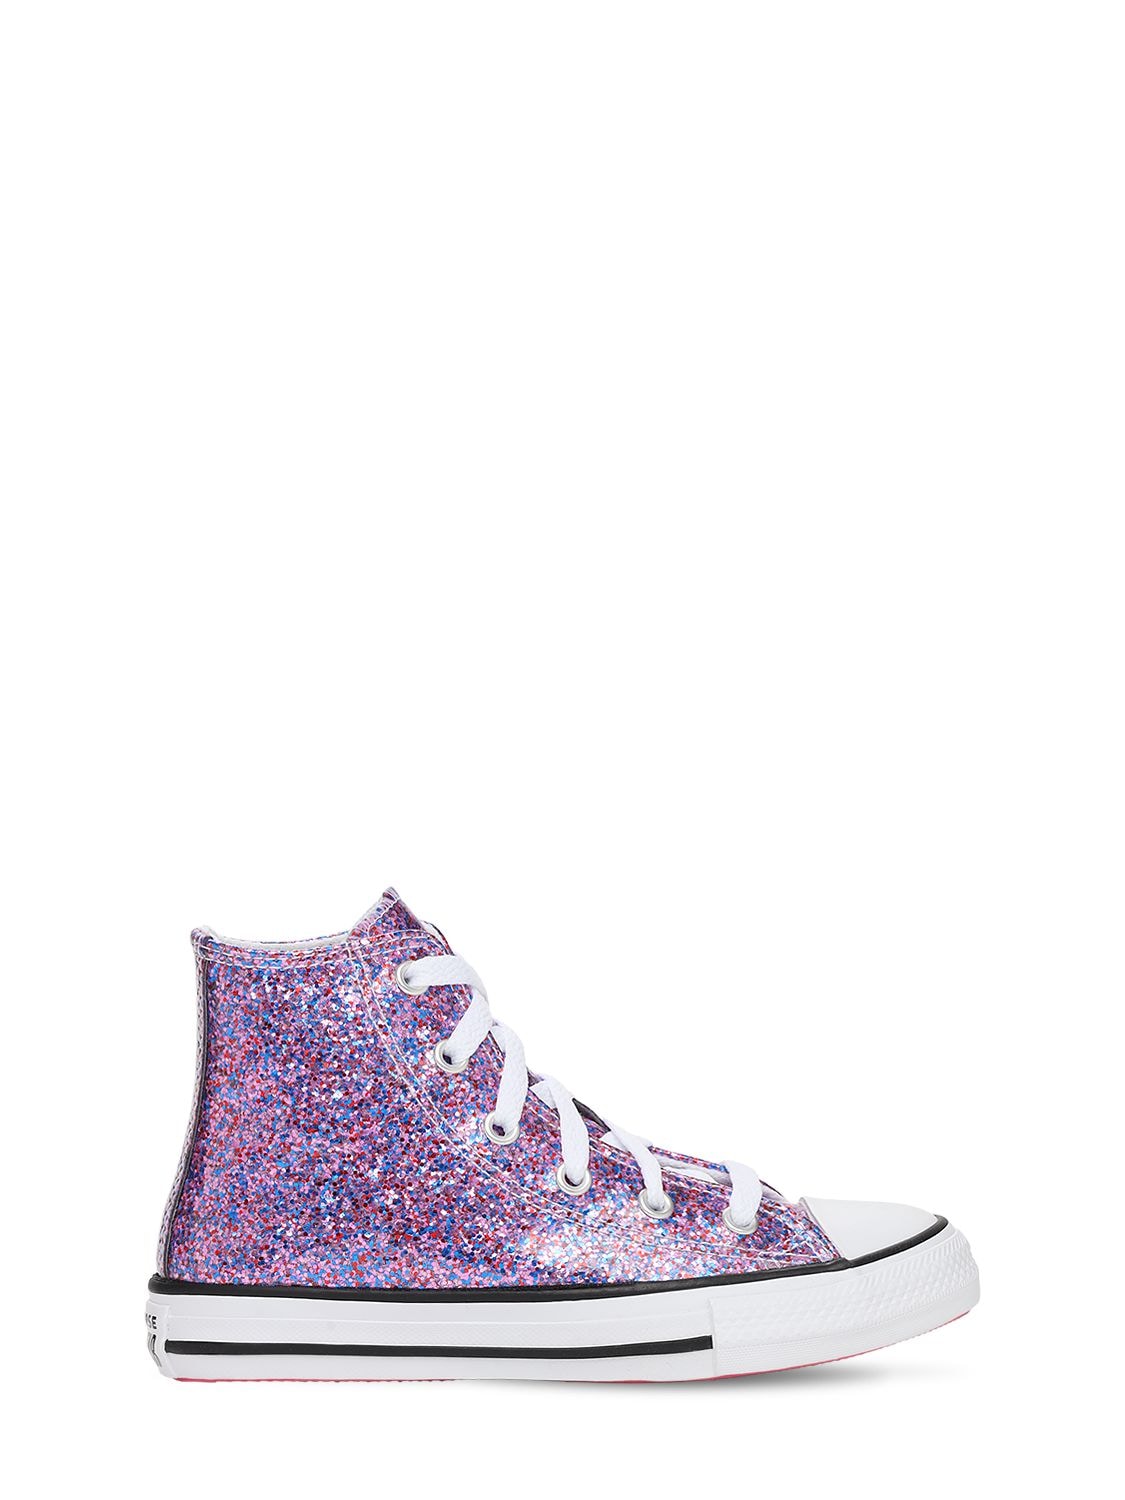 Image of Coated Glitter Chuck Taylor Sneakers